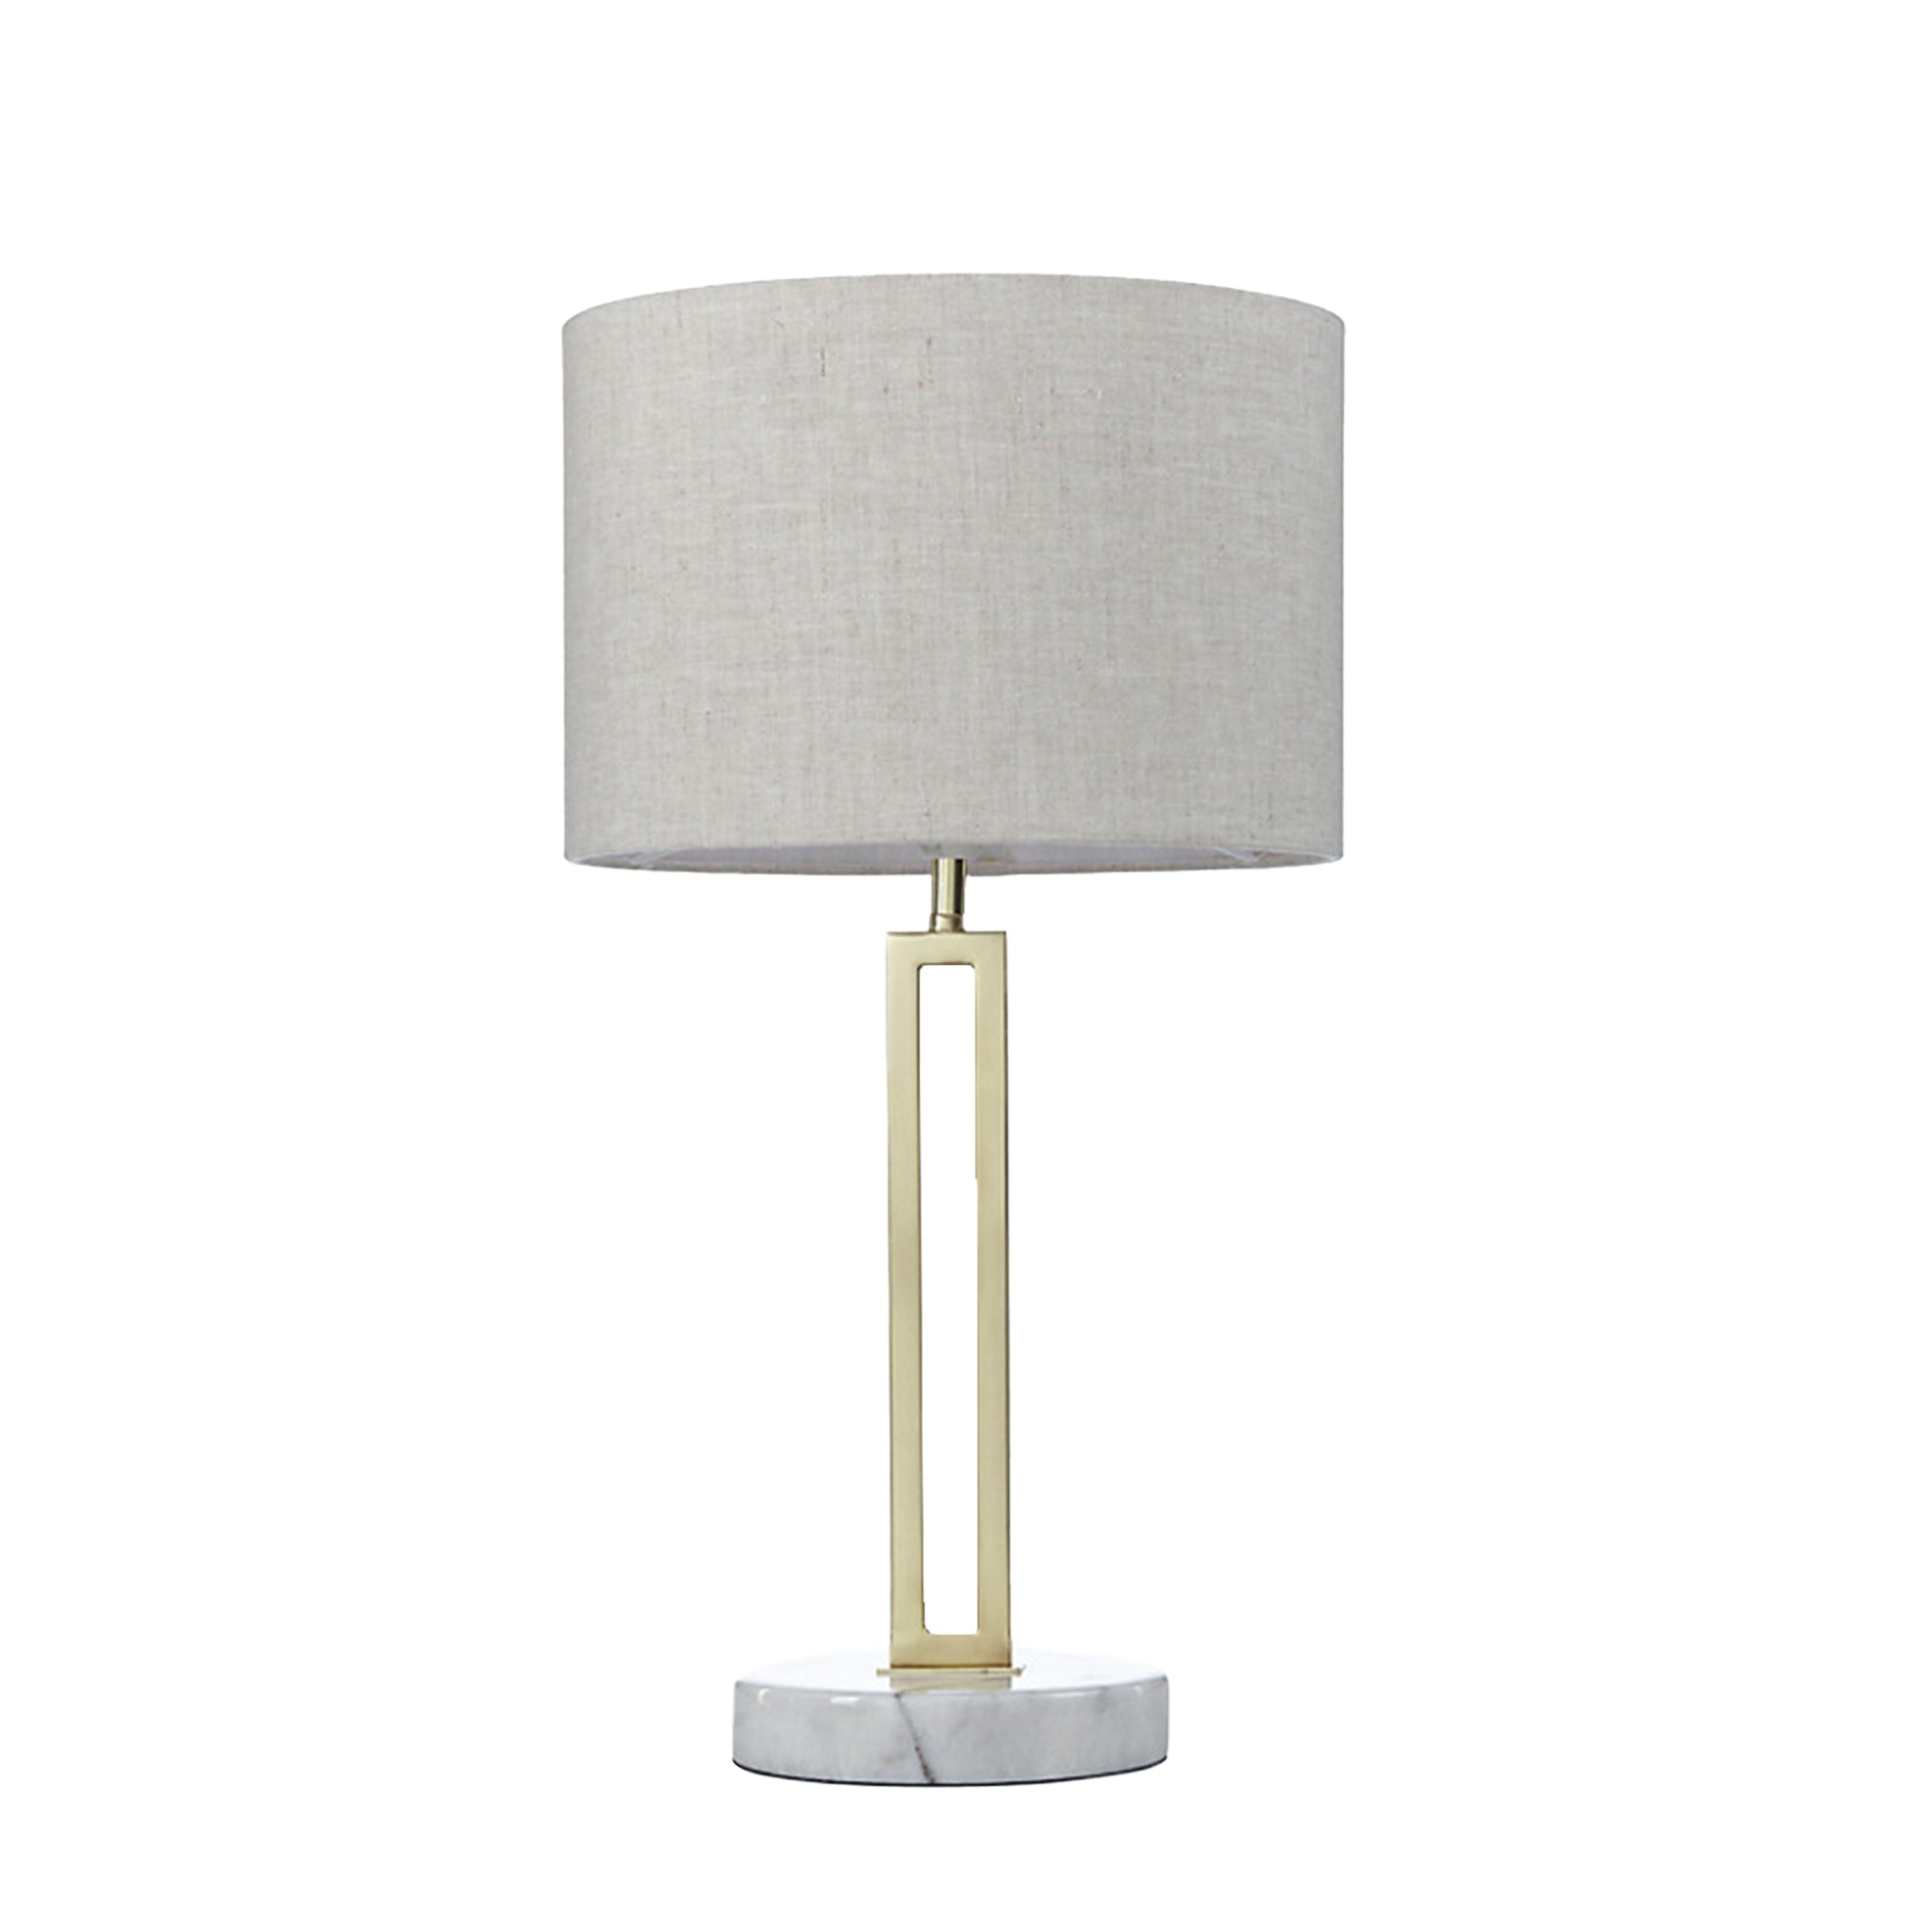 Margleus Table Lamp with Marble Base